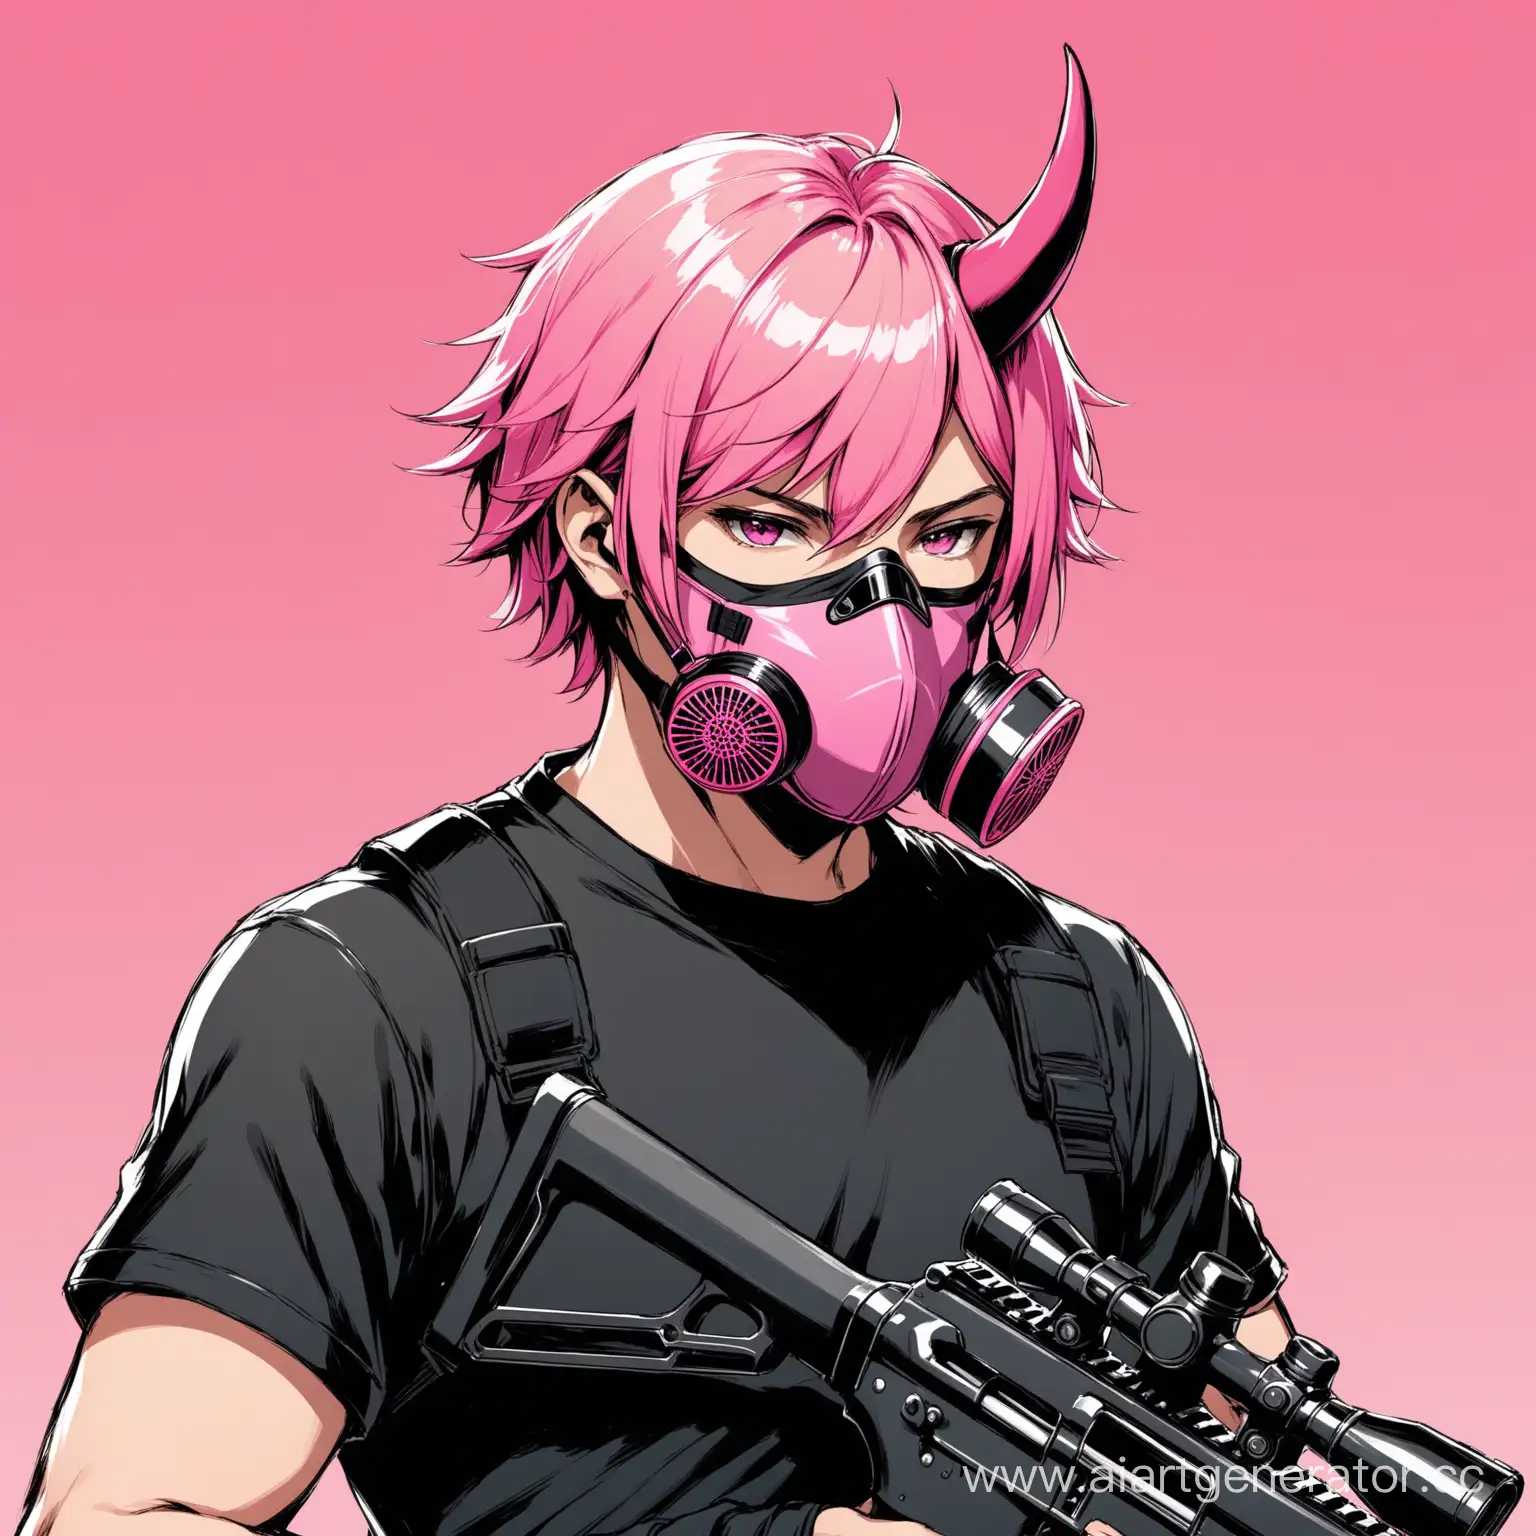 PinkHaired-Young-Man-with-Horns-Wearing-Respirator-Mask-and-Holding-Rifle